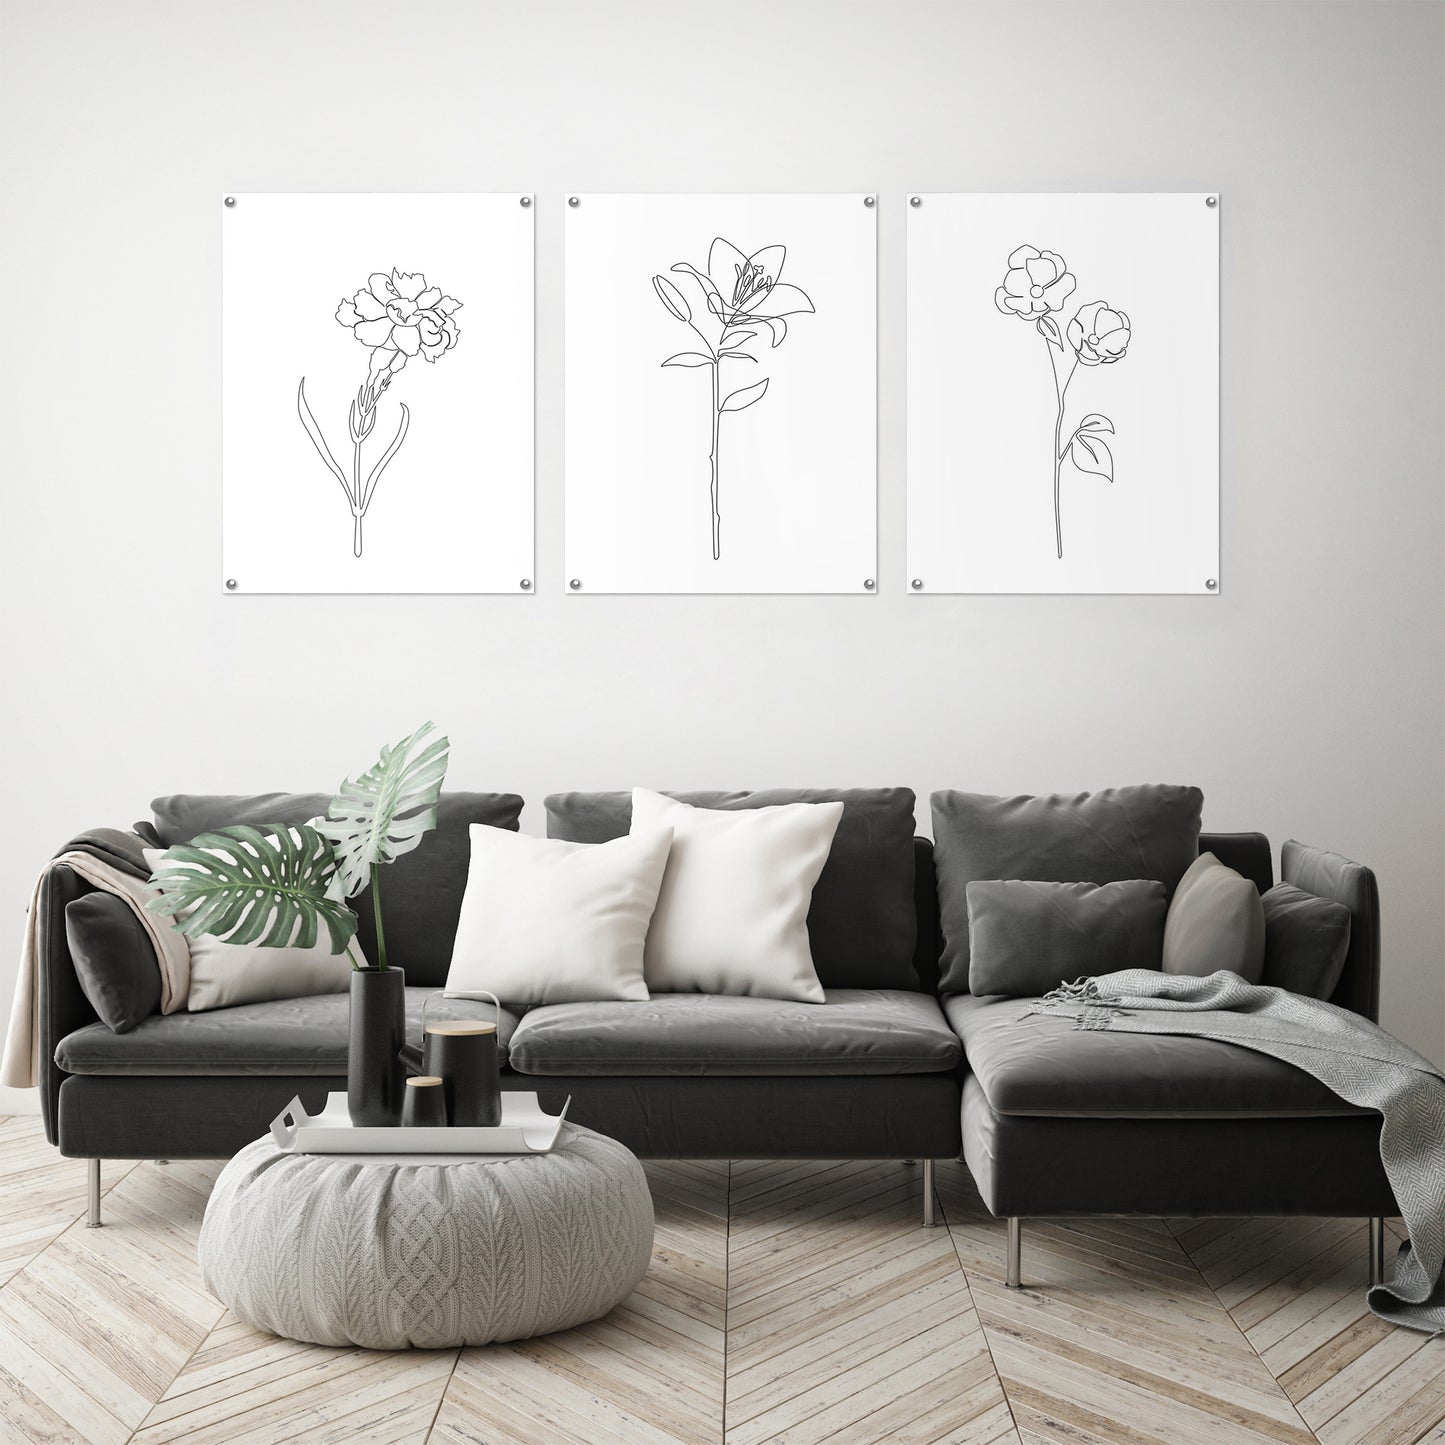 (Set of 3) Triptych Wall Art Floral Sketches by Explicit Design - Poster Print